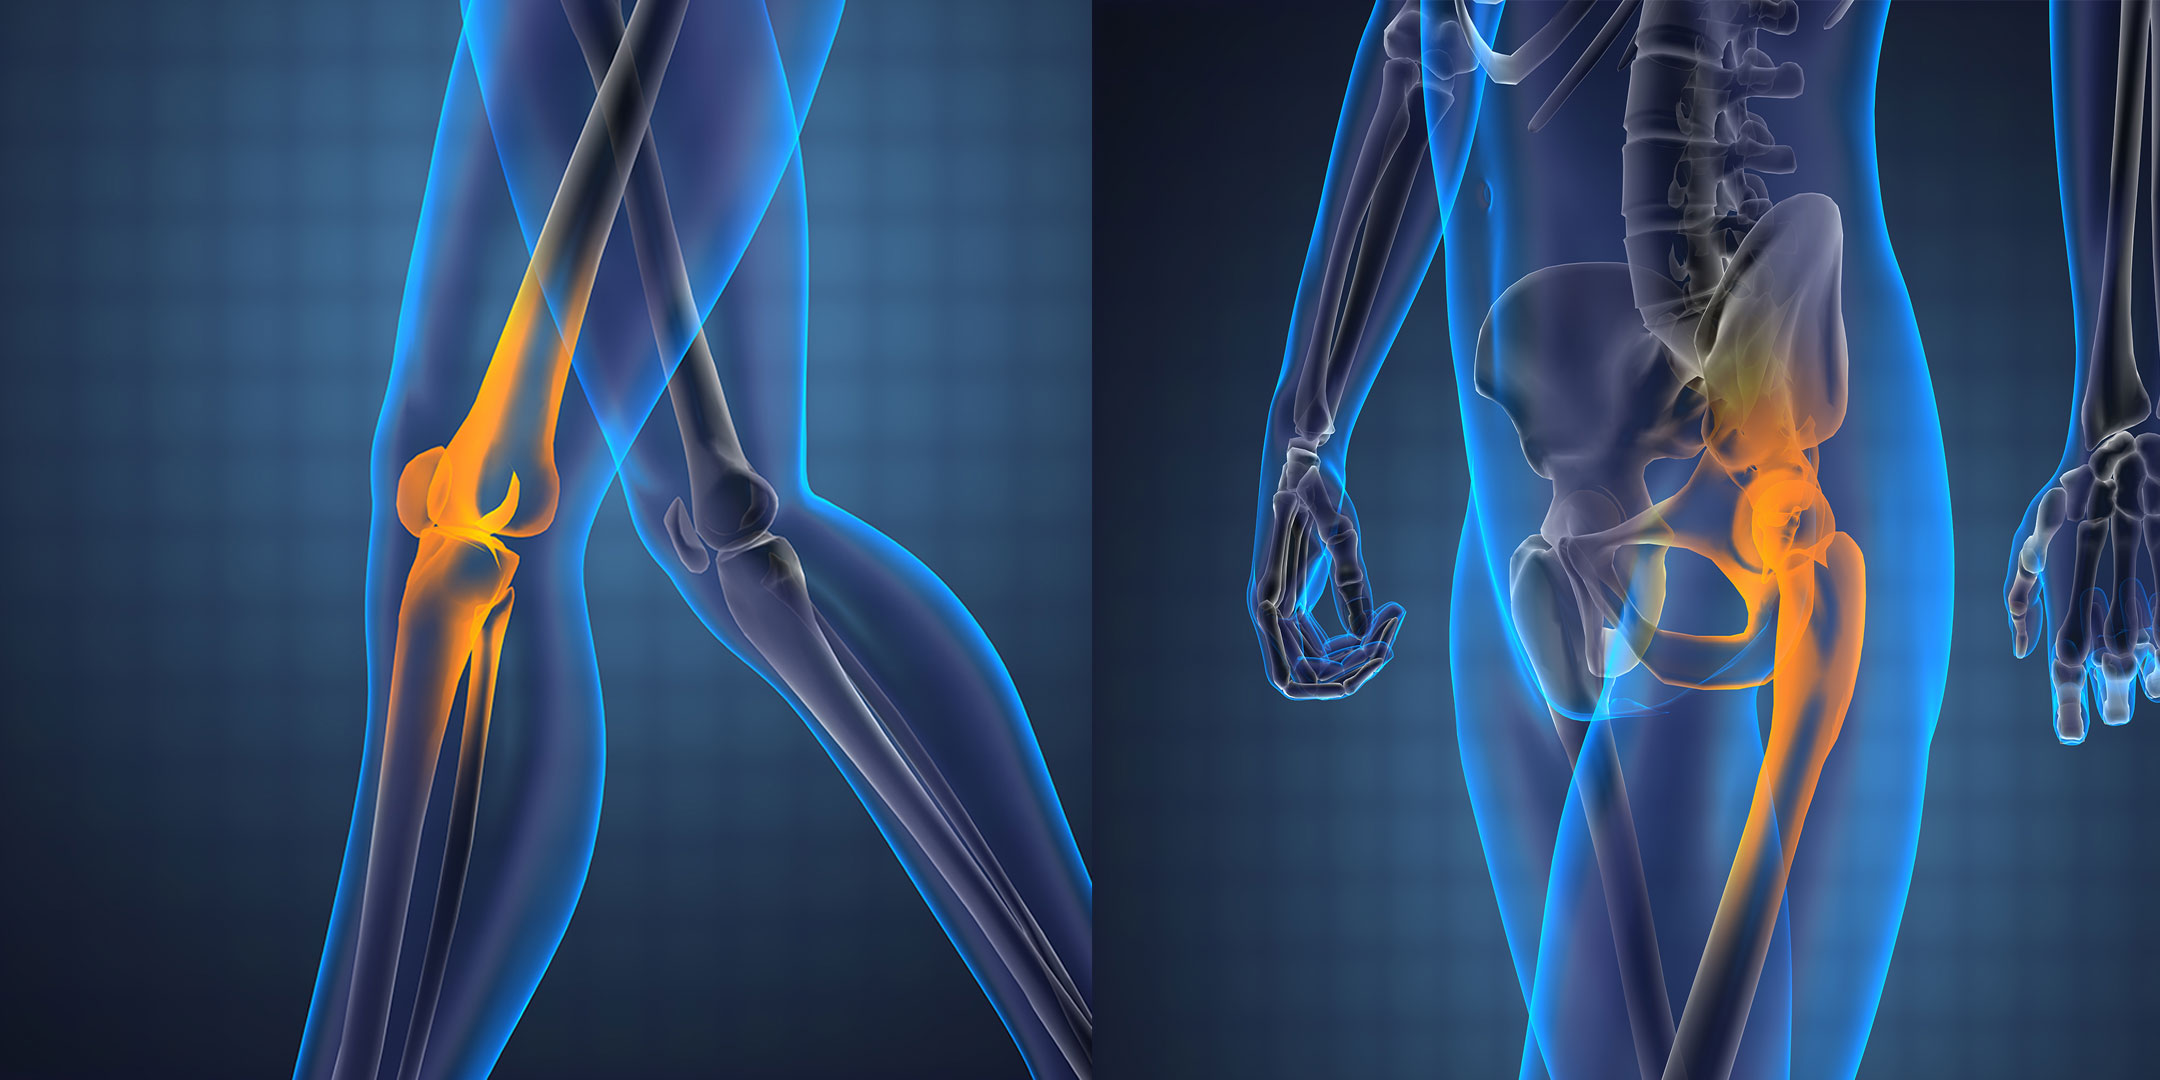 Side-by-side anatomical images of an inflamed knee and an inflamed hip